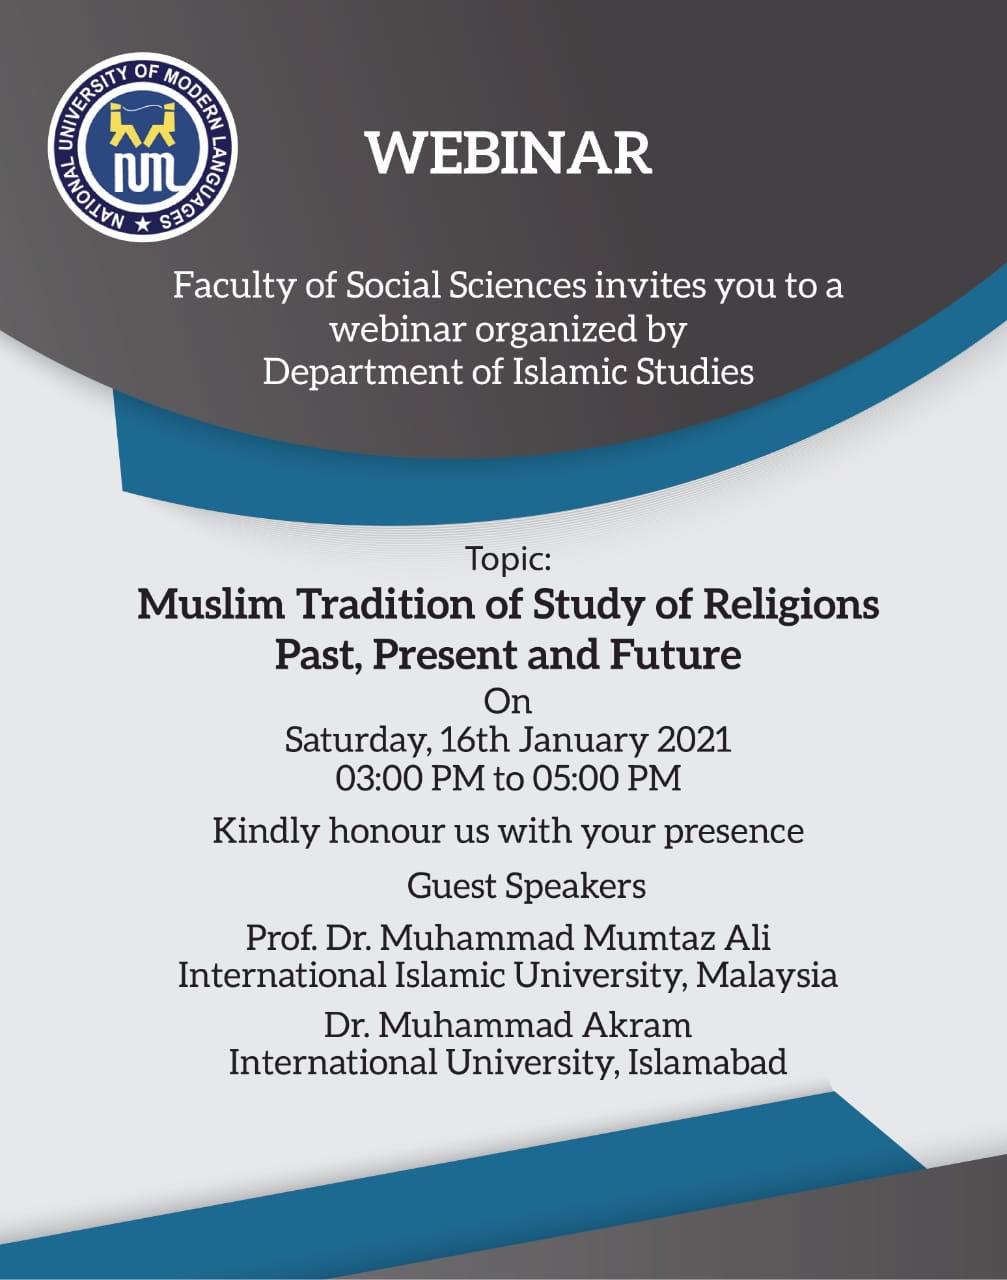 Muslim Tradition of the Study of Religion: Past, Present and Future